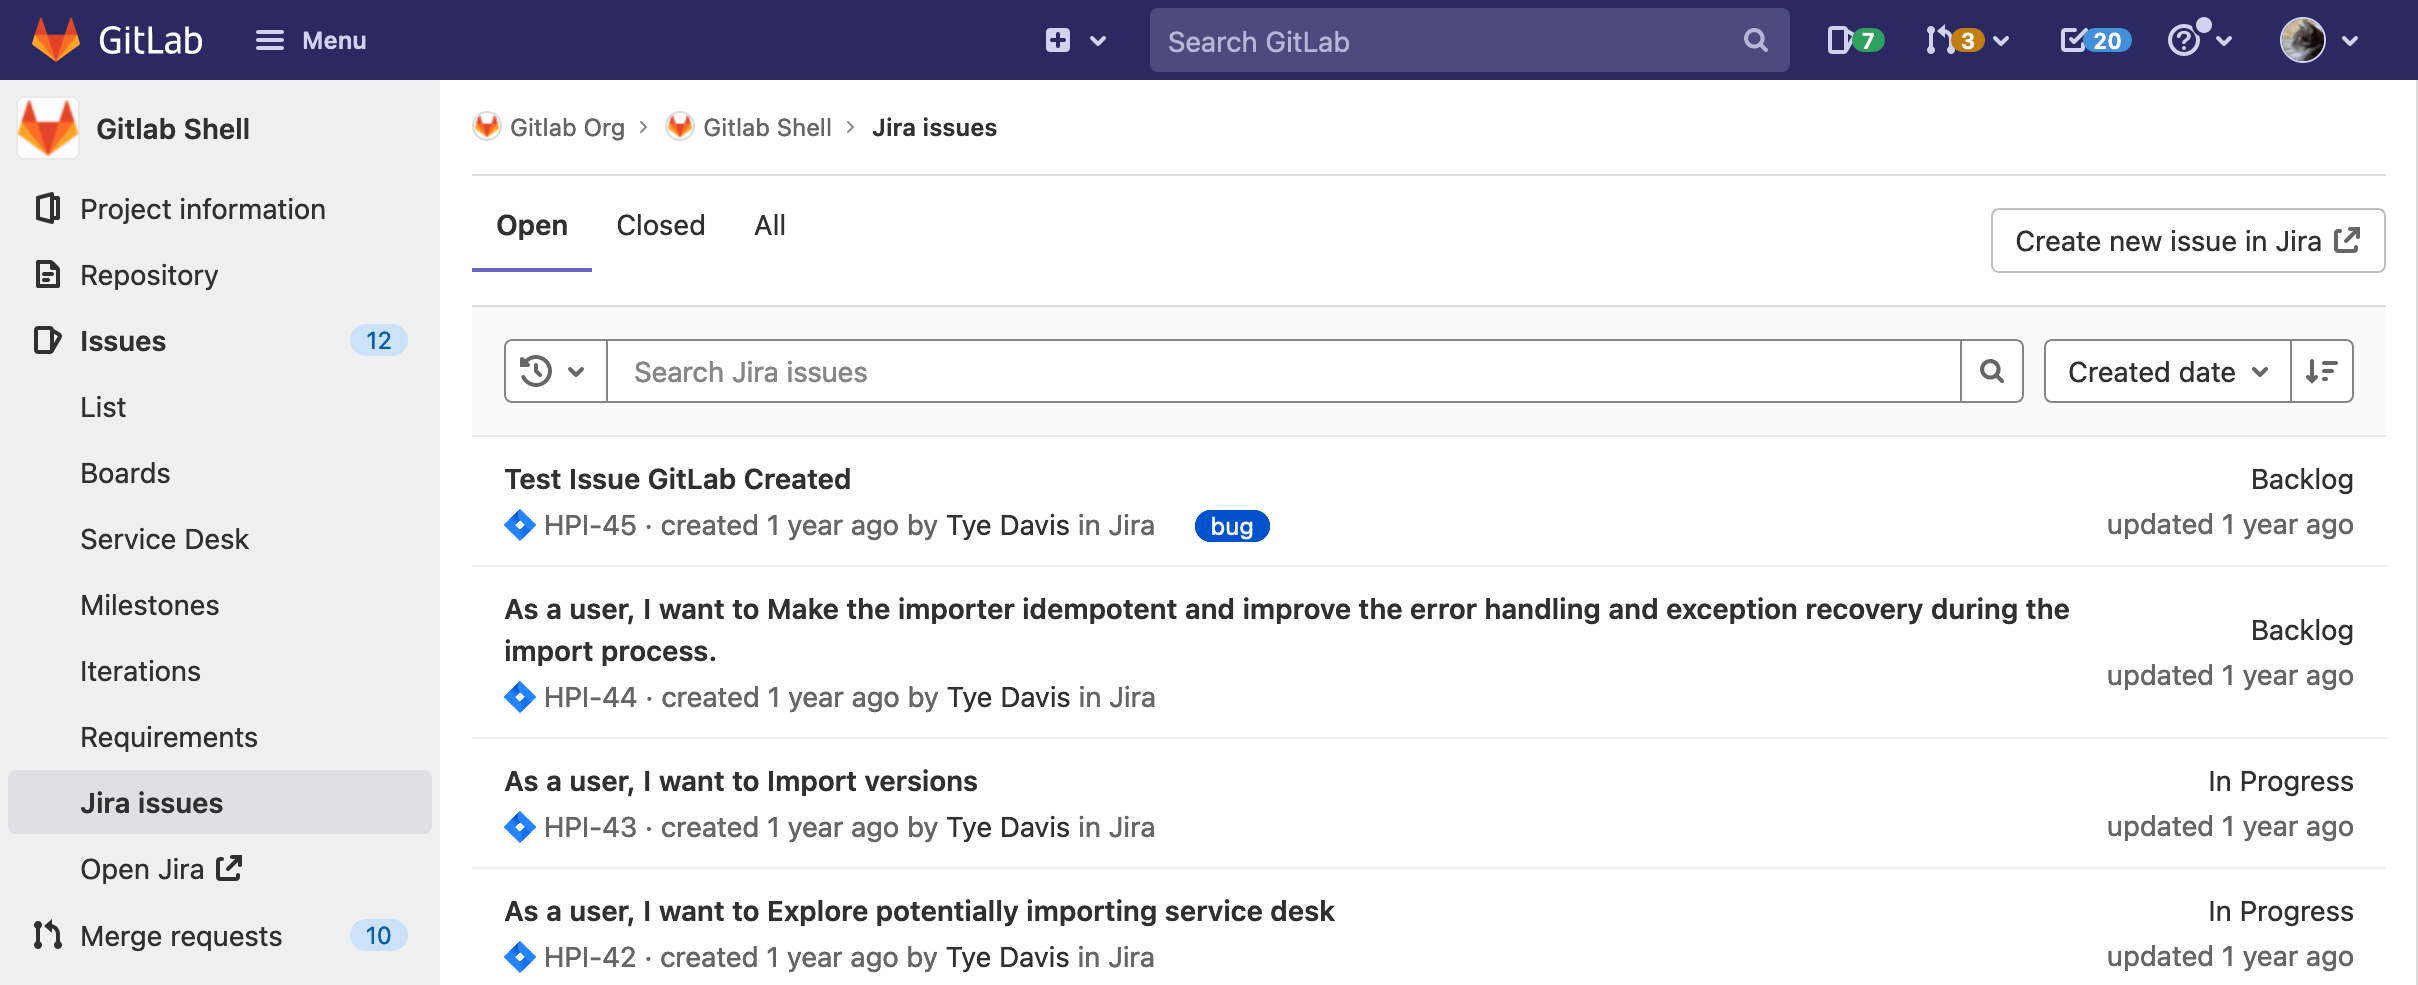 Jira issues integration enabled